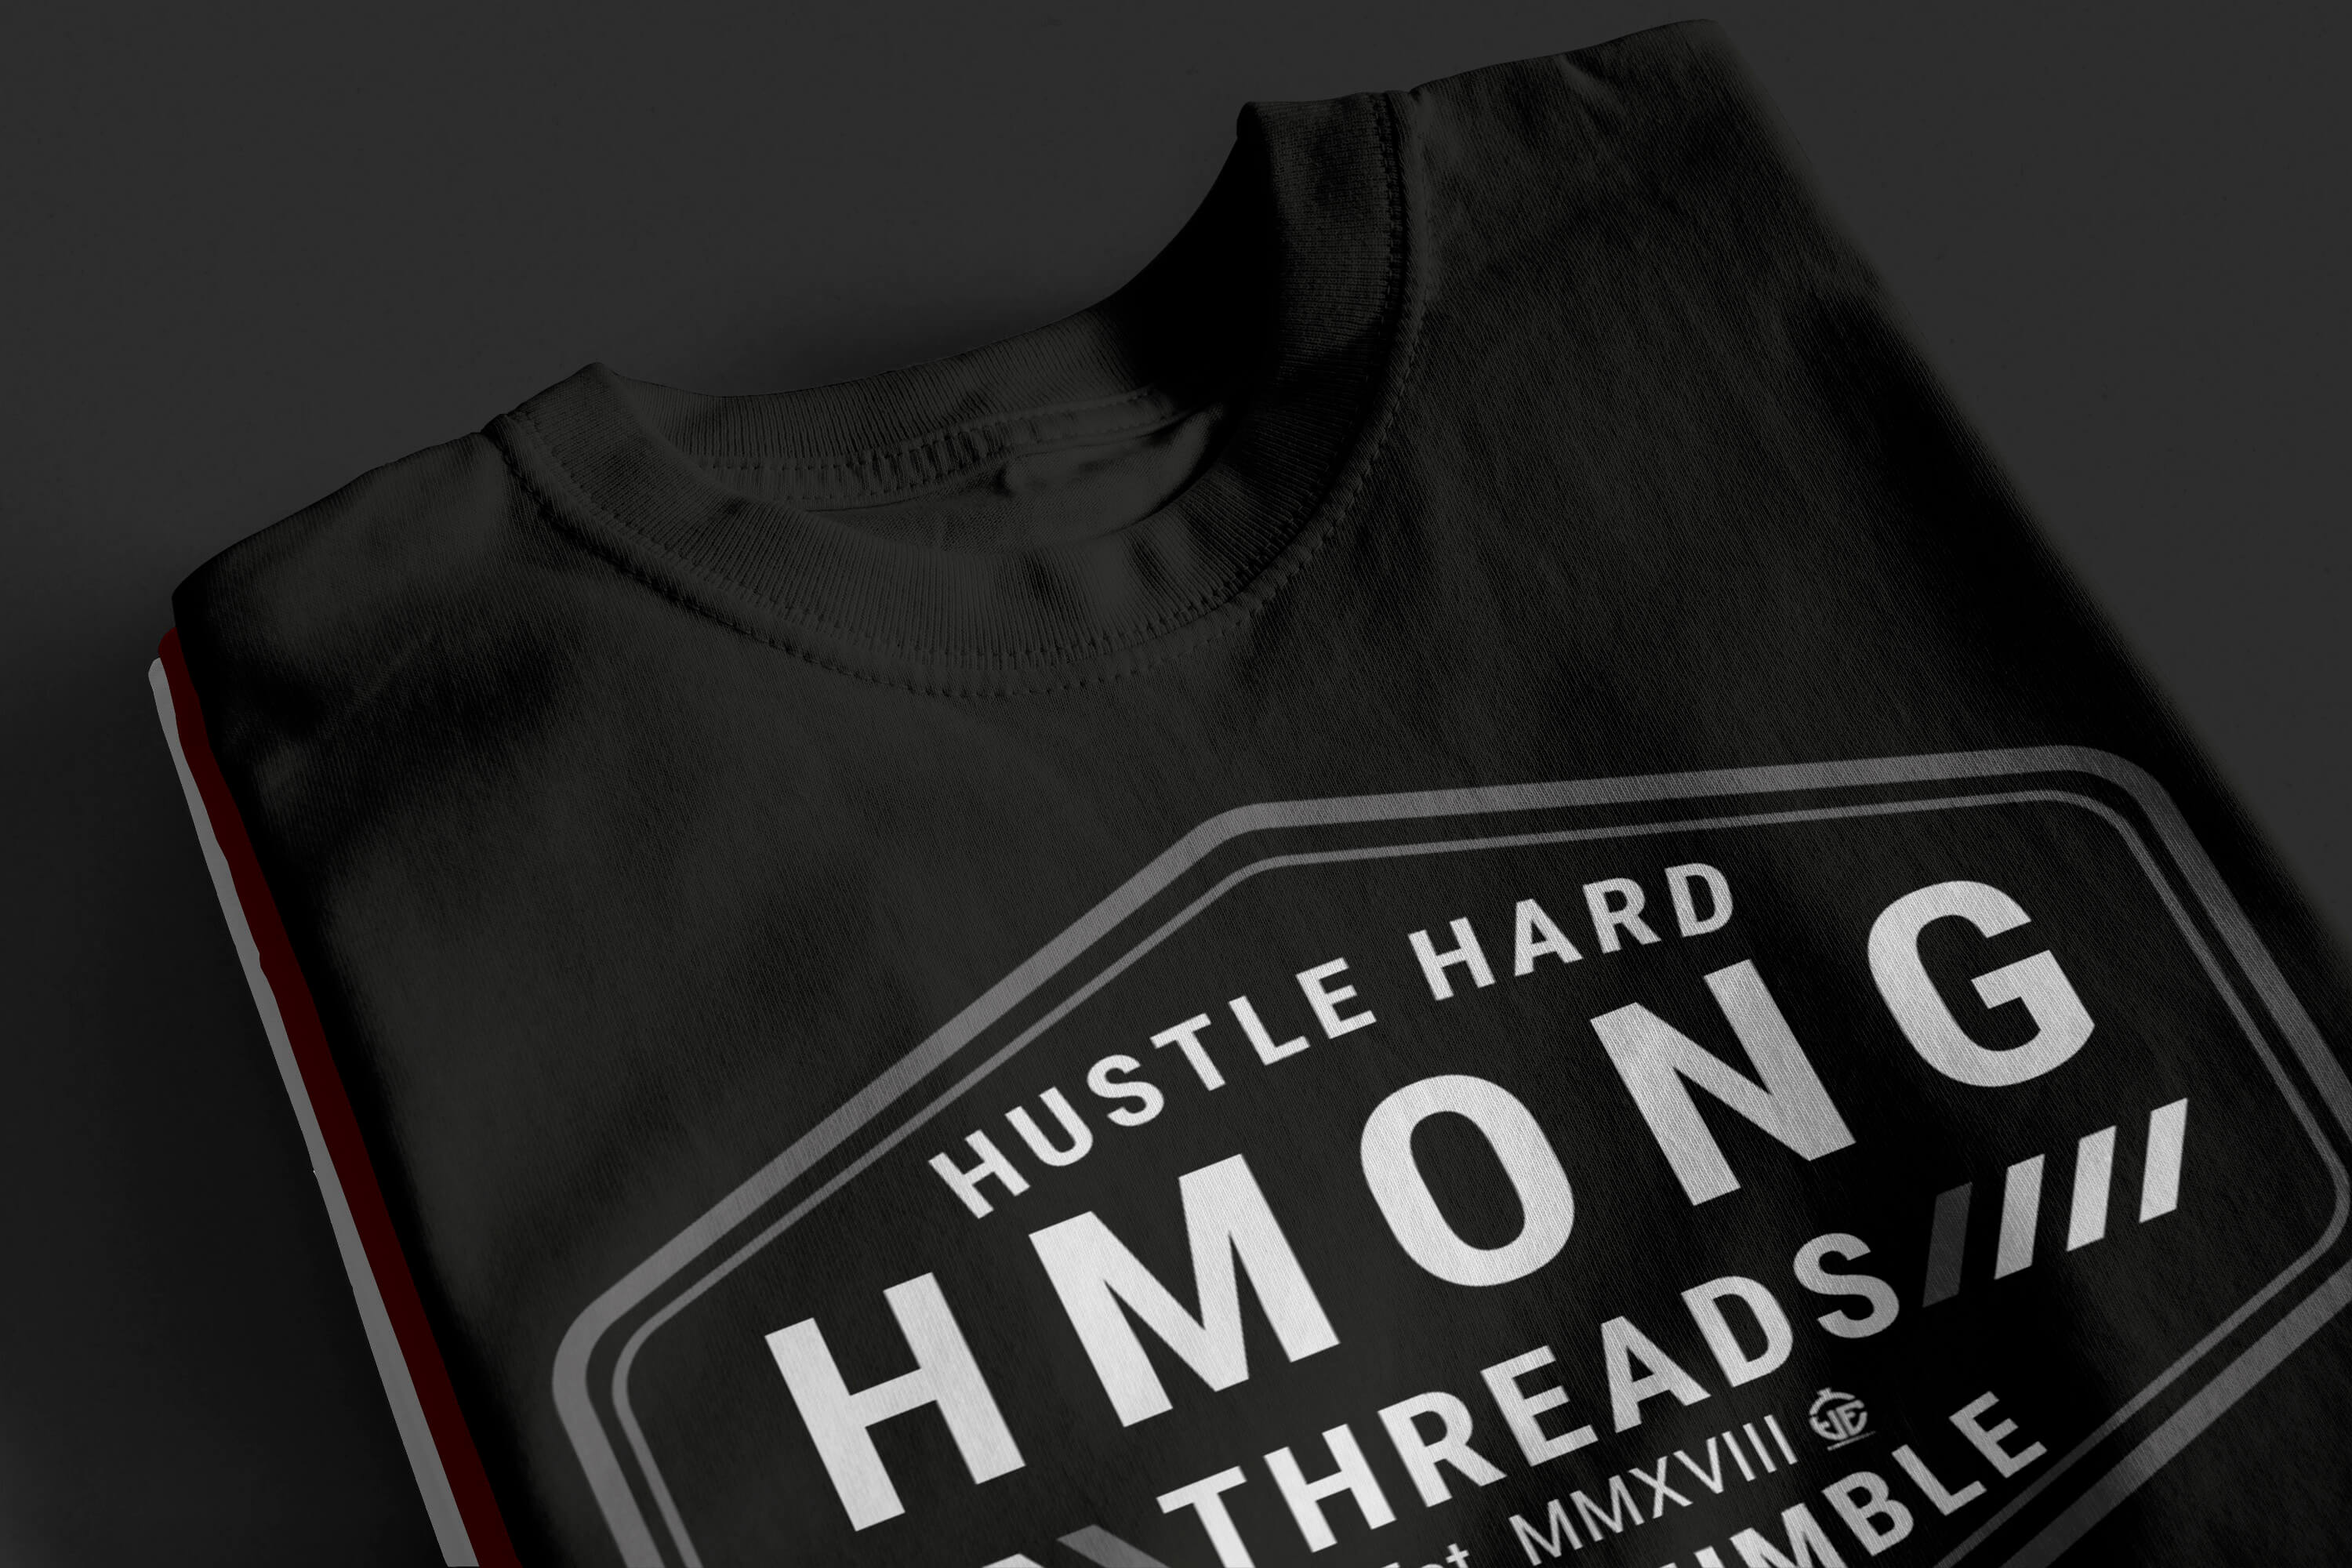 Hustle Hard, Stay Humble - Black Color T-Shirt - HMONG THREADS